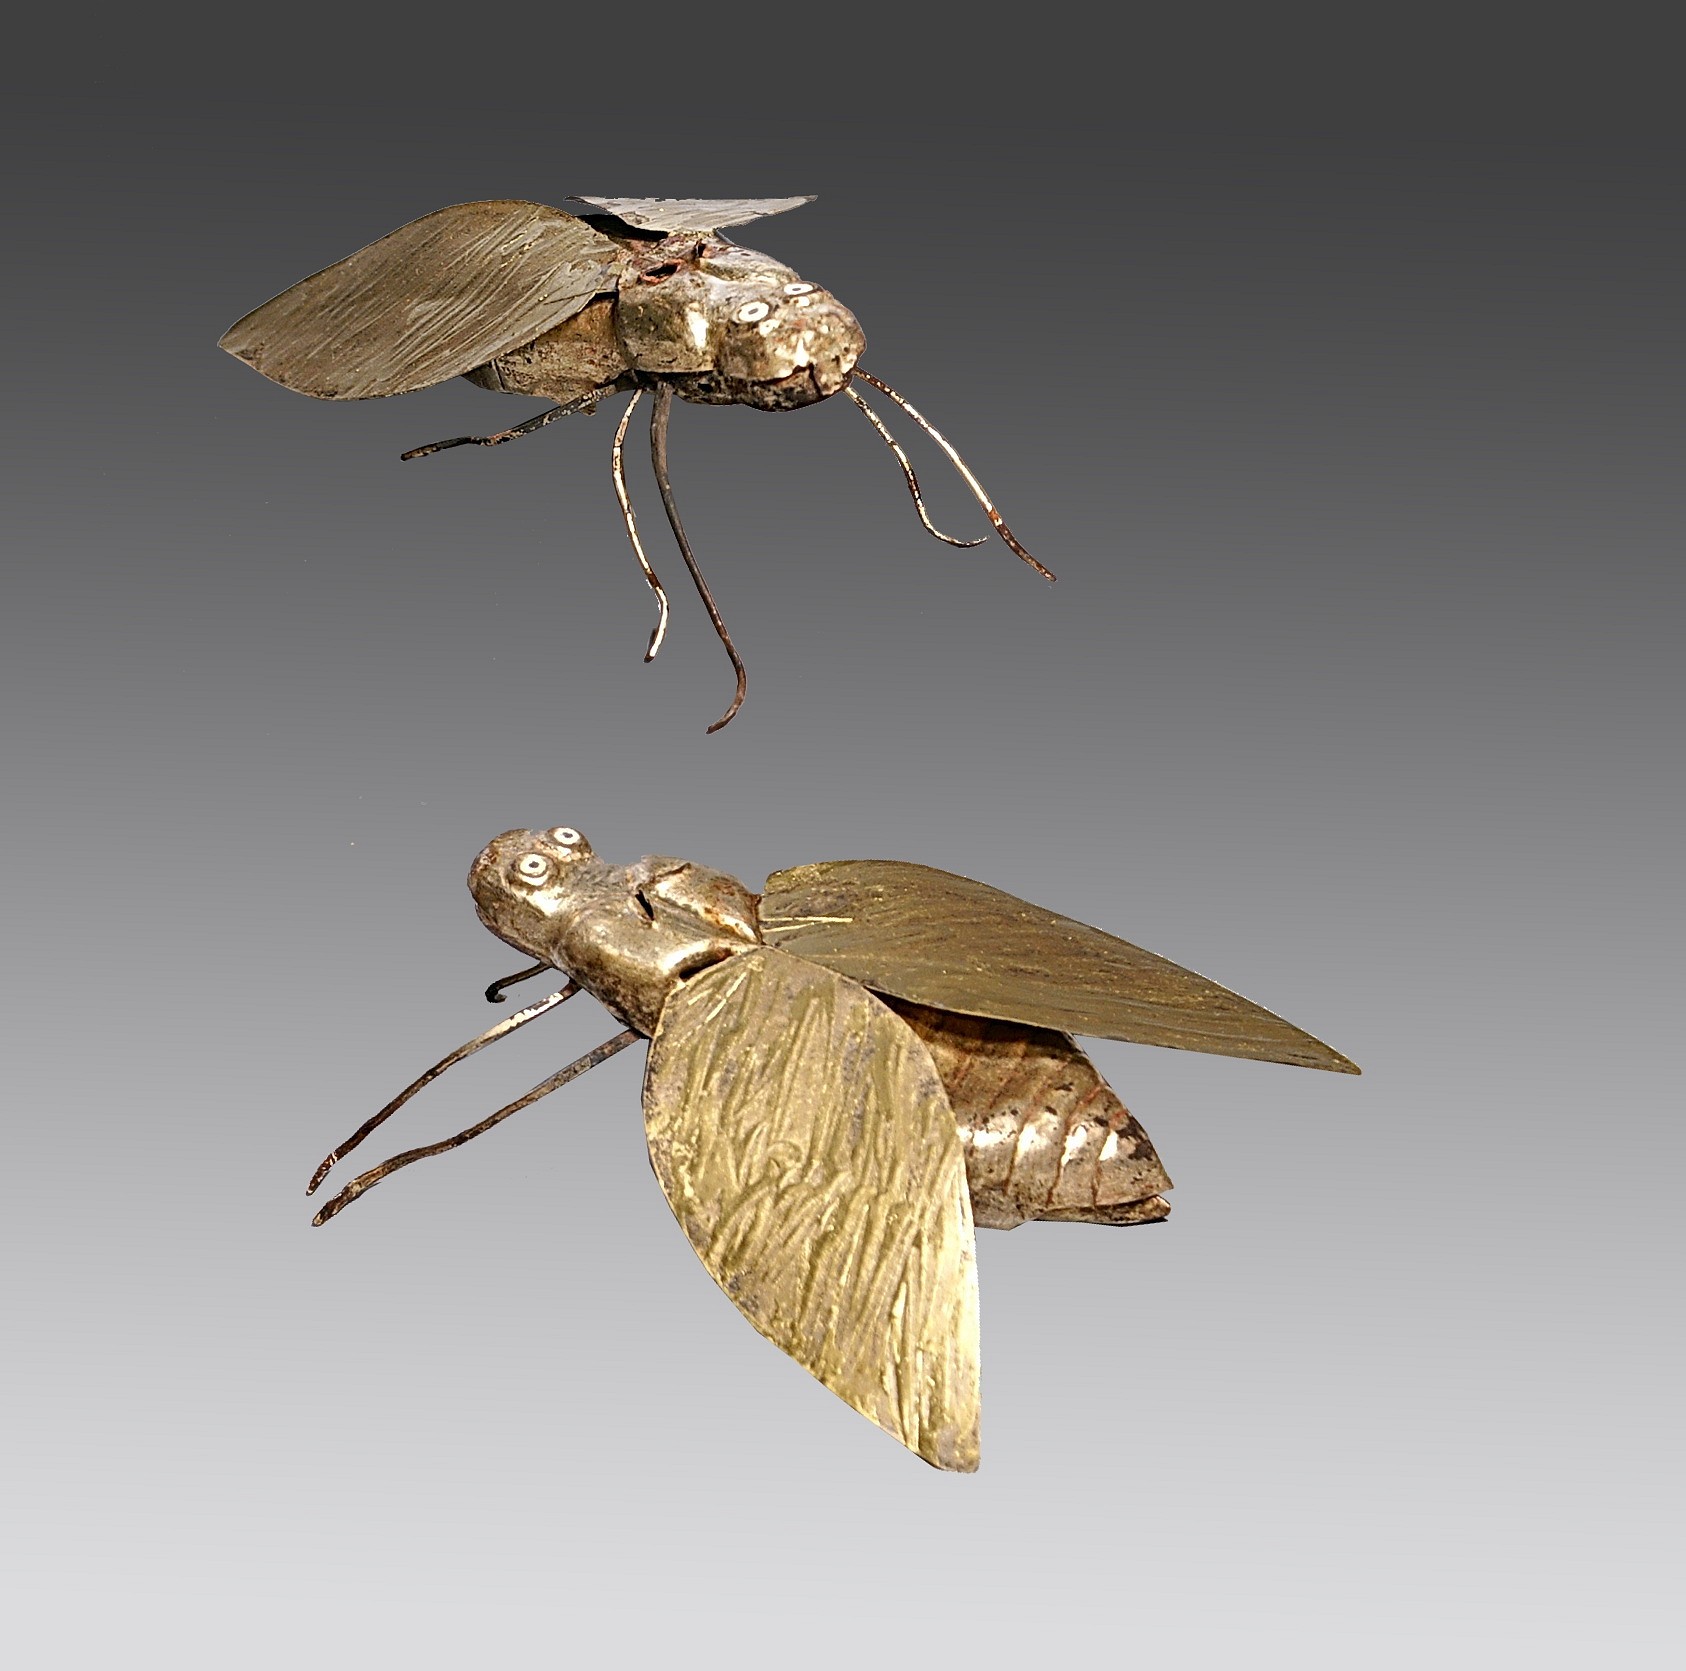 Peru, Loma Negra Gilt Copper Pair of Hoverflies
The flies are examples of a highly skilled gilding technique over copper.  The construction is of tab and hammered and shaped parts to create a three-dimensional body. This was preferred in Peru over lost wax casting.  Loma Negra Royal tombs were found in Northern Peru in the 1960's. The largest holdings of this material are in the Metropolitan Museum of Art. Other examples of critters are illustrated in PRE-COLUMBIAN ART of South America by Alan Lapiner, fig 376.   
There is a Loma Negra fly in the Met Museum ref 1981.459.28 in poor condition.  Hoverflies are among the largest flies and have colorful bodies and are harmless.  They often imitate bees or wasps as a survival technique to appear dangerous to their predators.  The Peruvian favored animals that metamorphose, (eggs, large, maggots to flies) as proof that humans can transcend into spirits.  Since hoverflies have colorful yellow and black bodies they connect with gold of the sun.  These flies are considered large for Loma Negra creatures and have no apparent function.

Media: Metal
Dimensions: Length 4 1/2"  x Width with wings 4"  Height :1 1/2"
$15,000
M9067